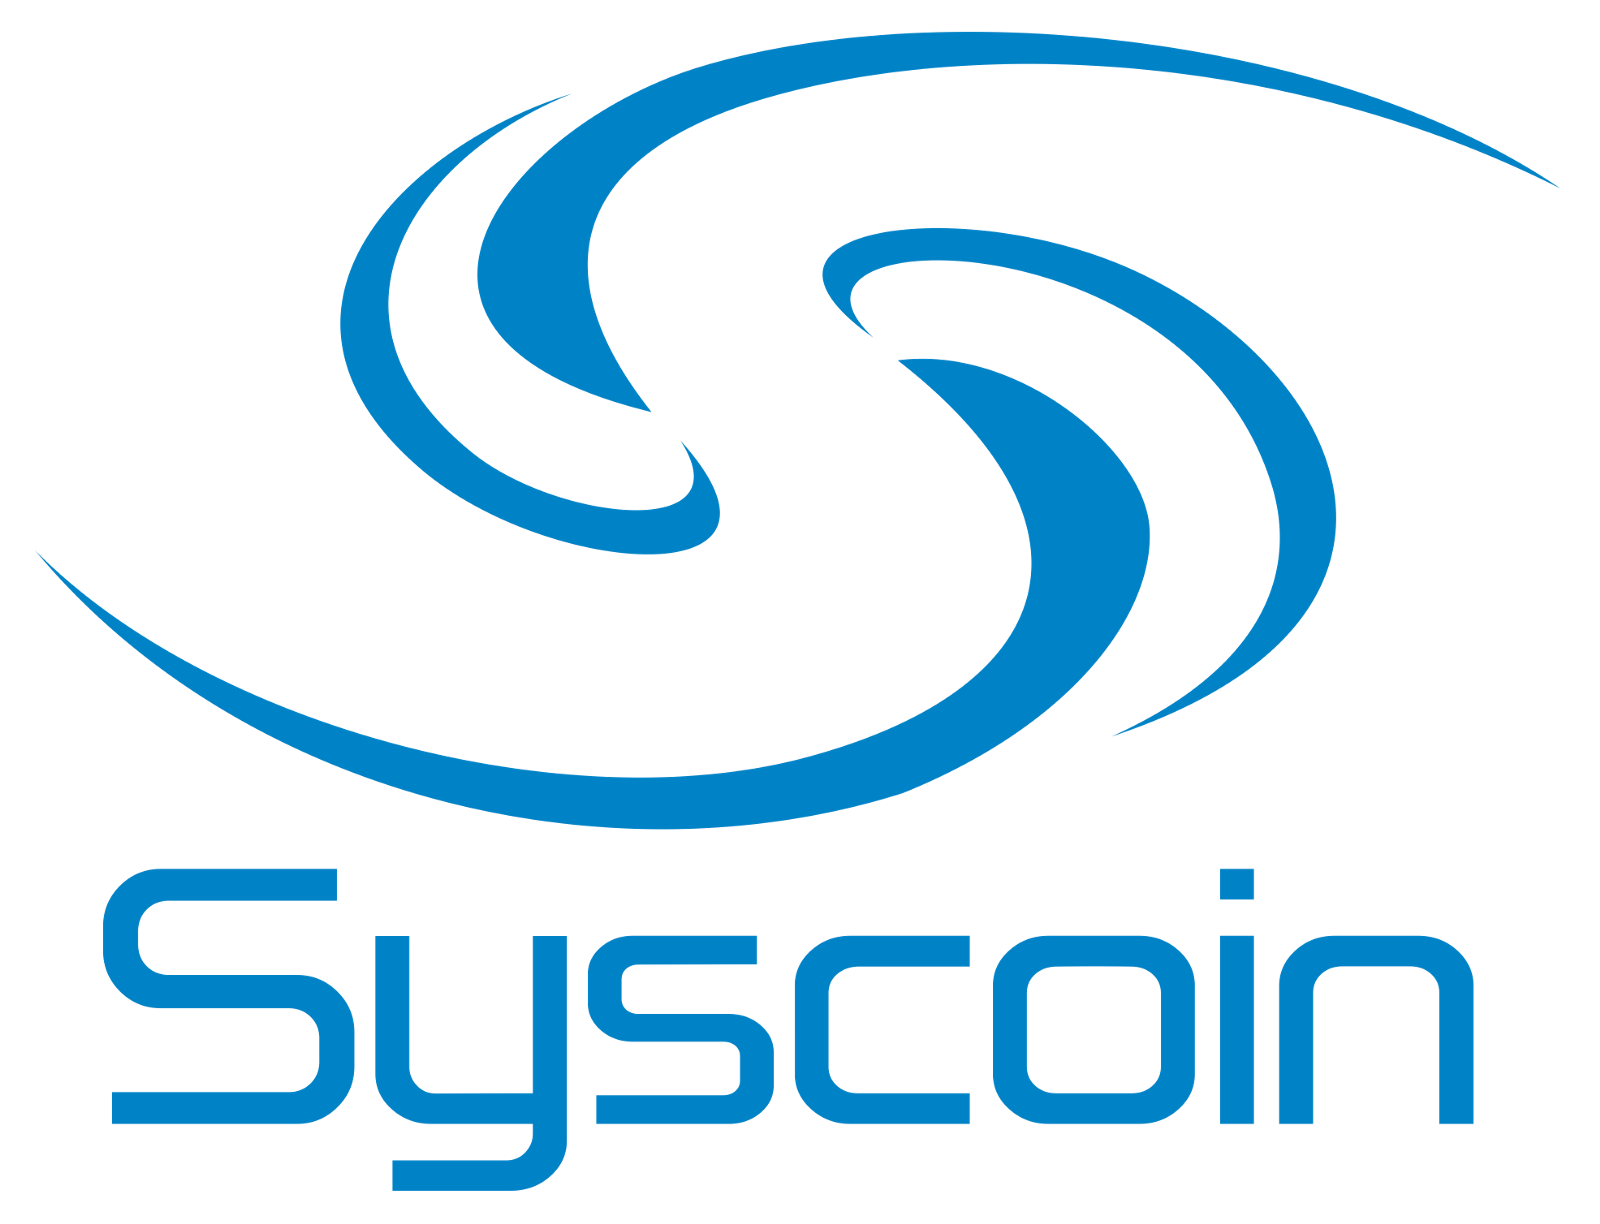 syscoin.png